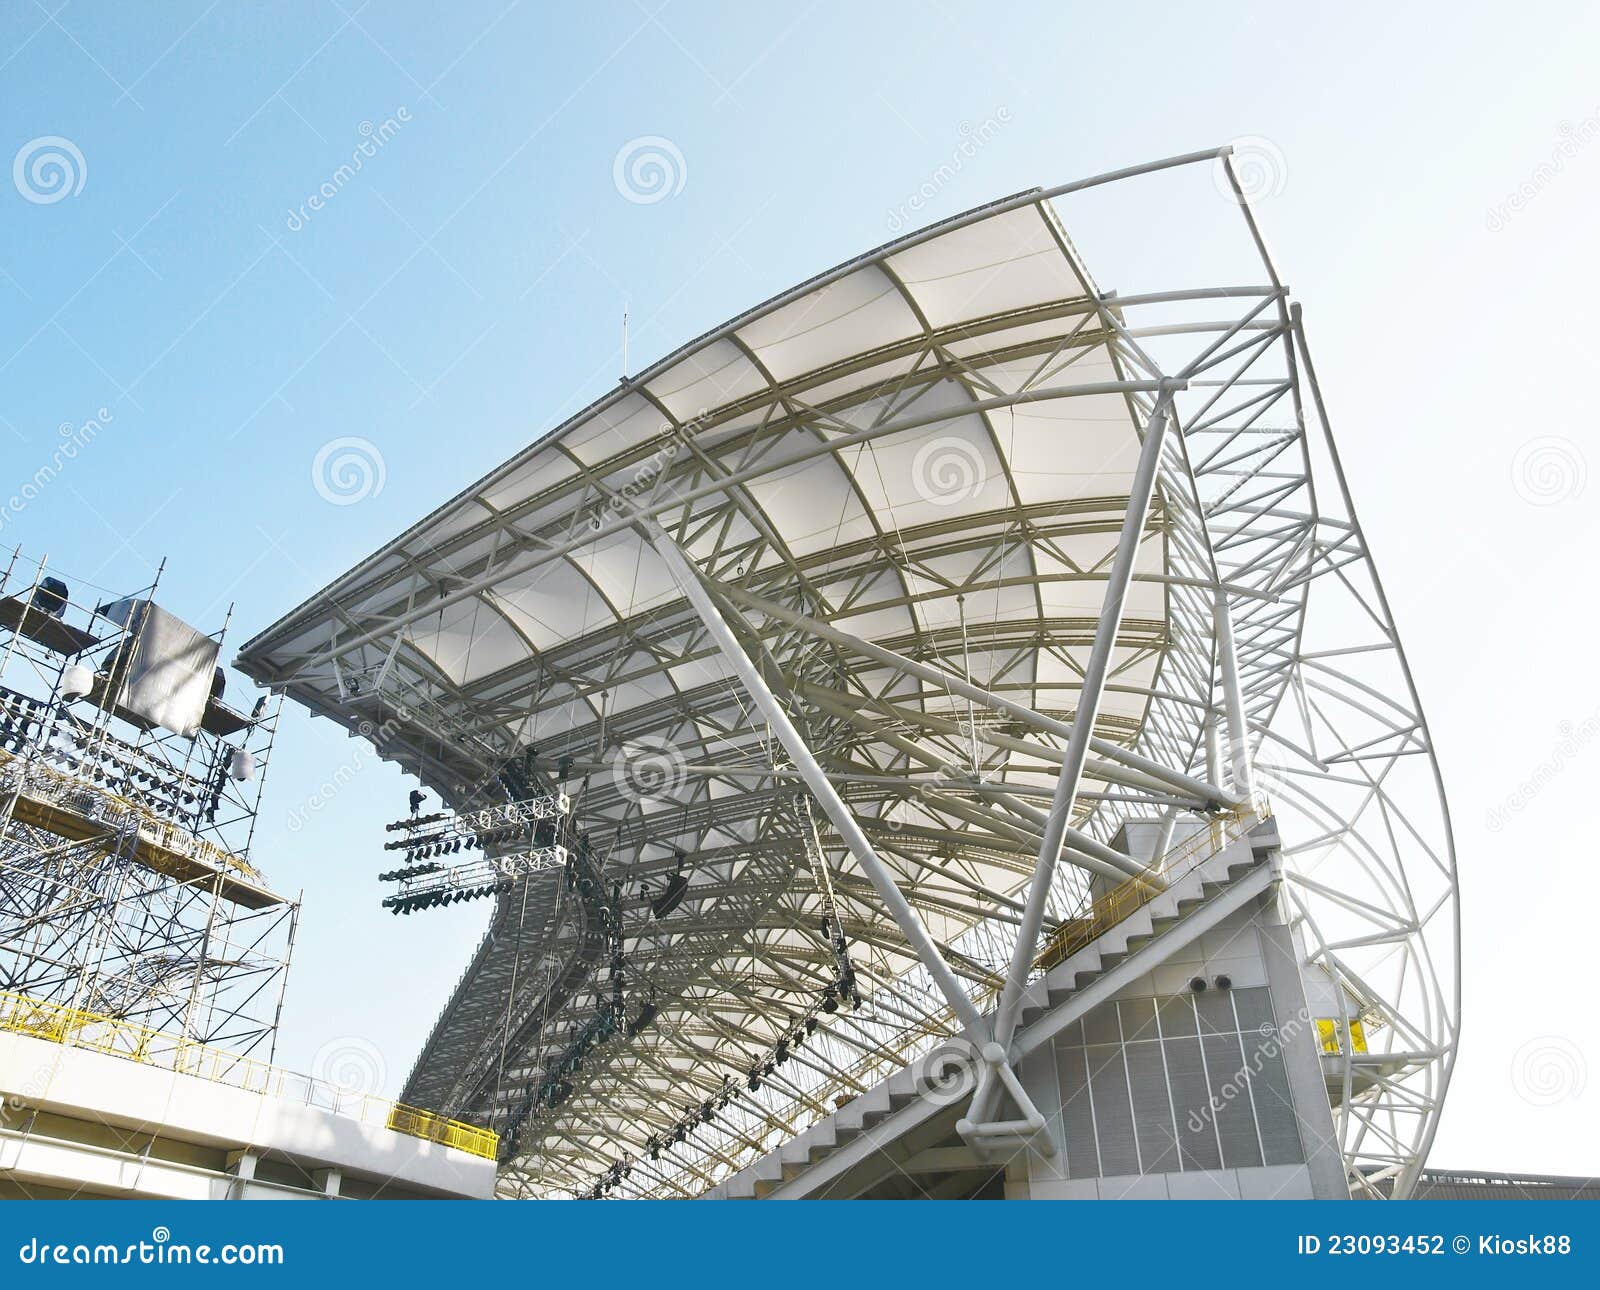 http://thumbs.dreamstime.com/z/steel-architecture-23093452.jpg